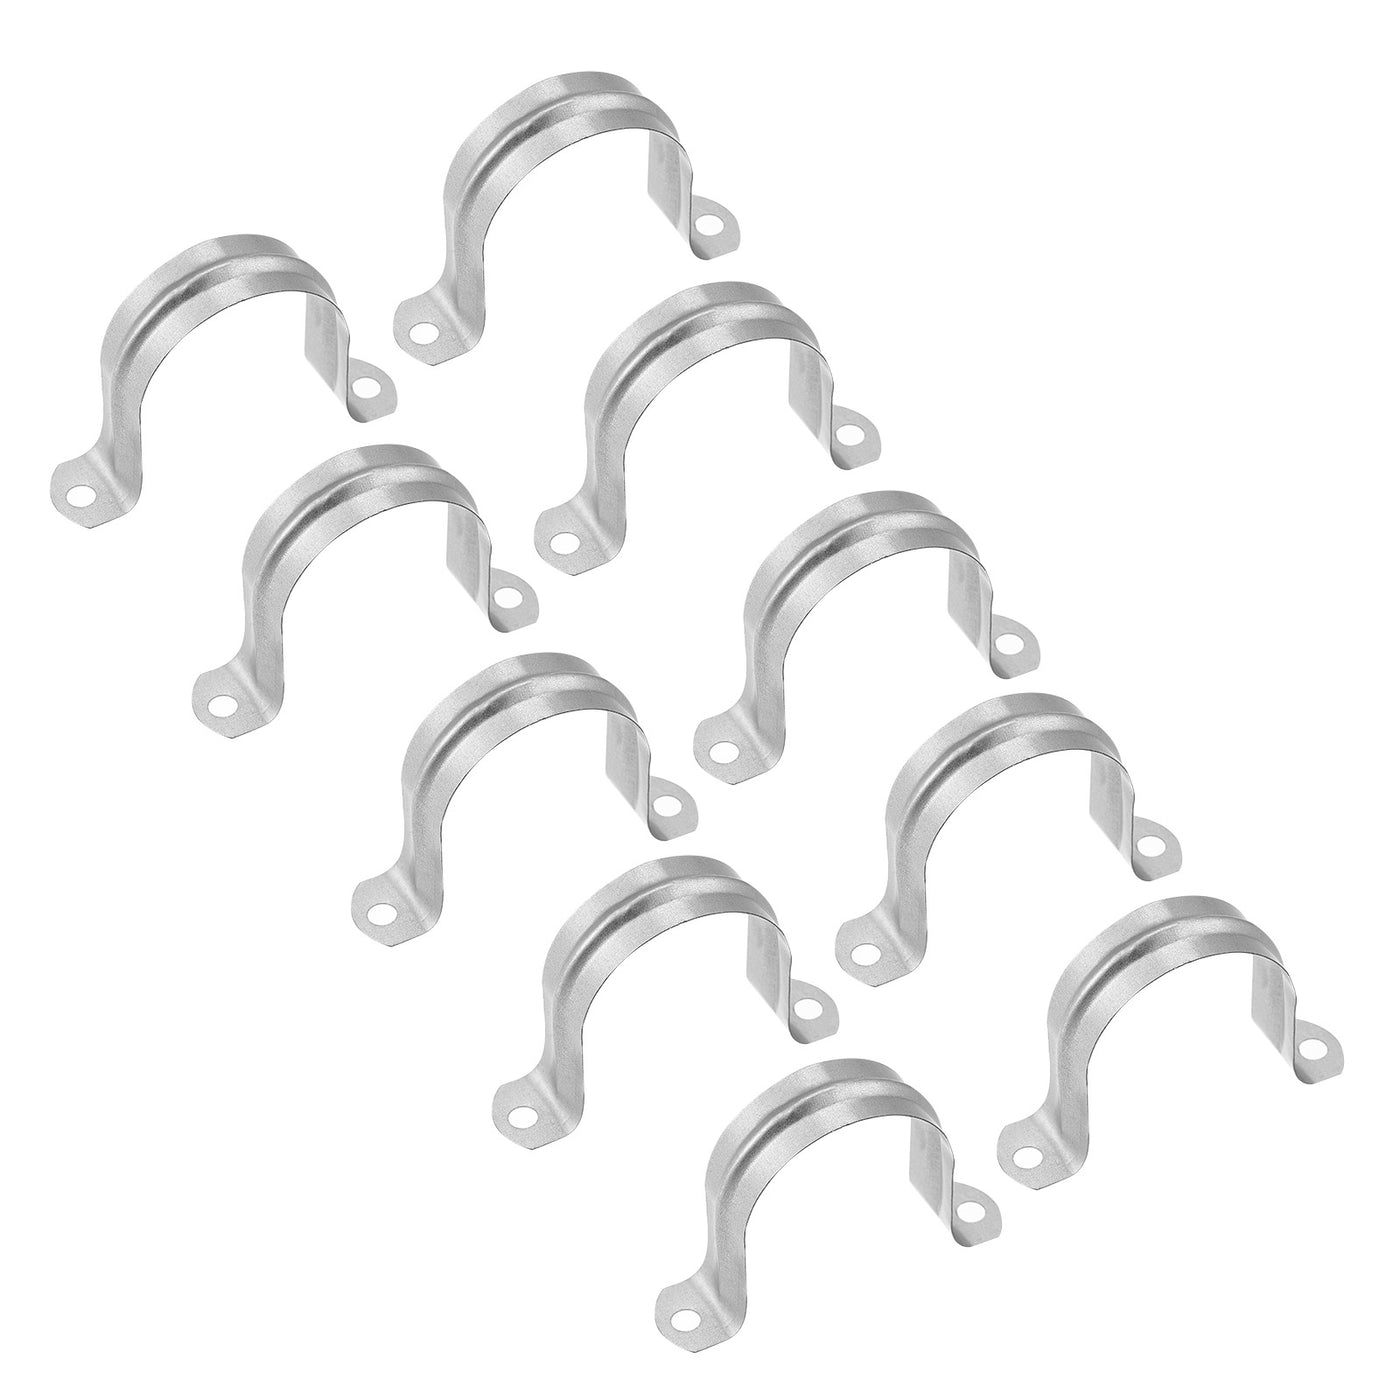 uxcell Uxcell Rigid Pipe Strap 24pcs 1 5/8" (40mm) Carbon Steel U Bracket Tension Tube Clamp